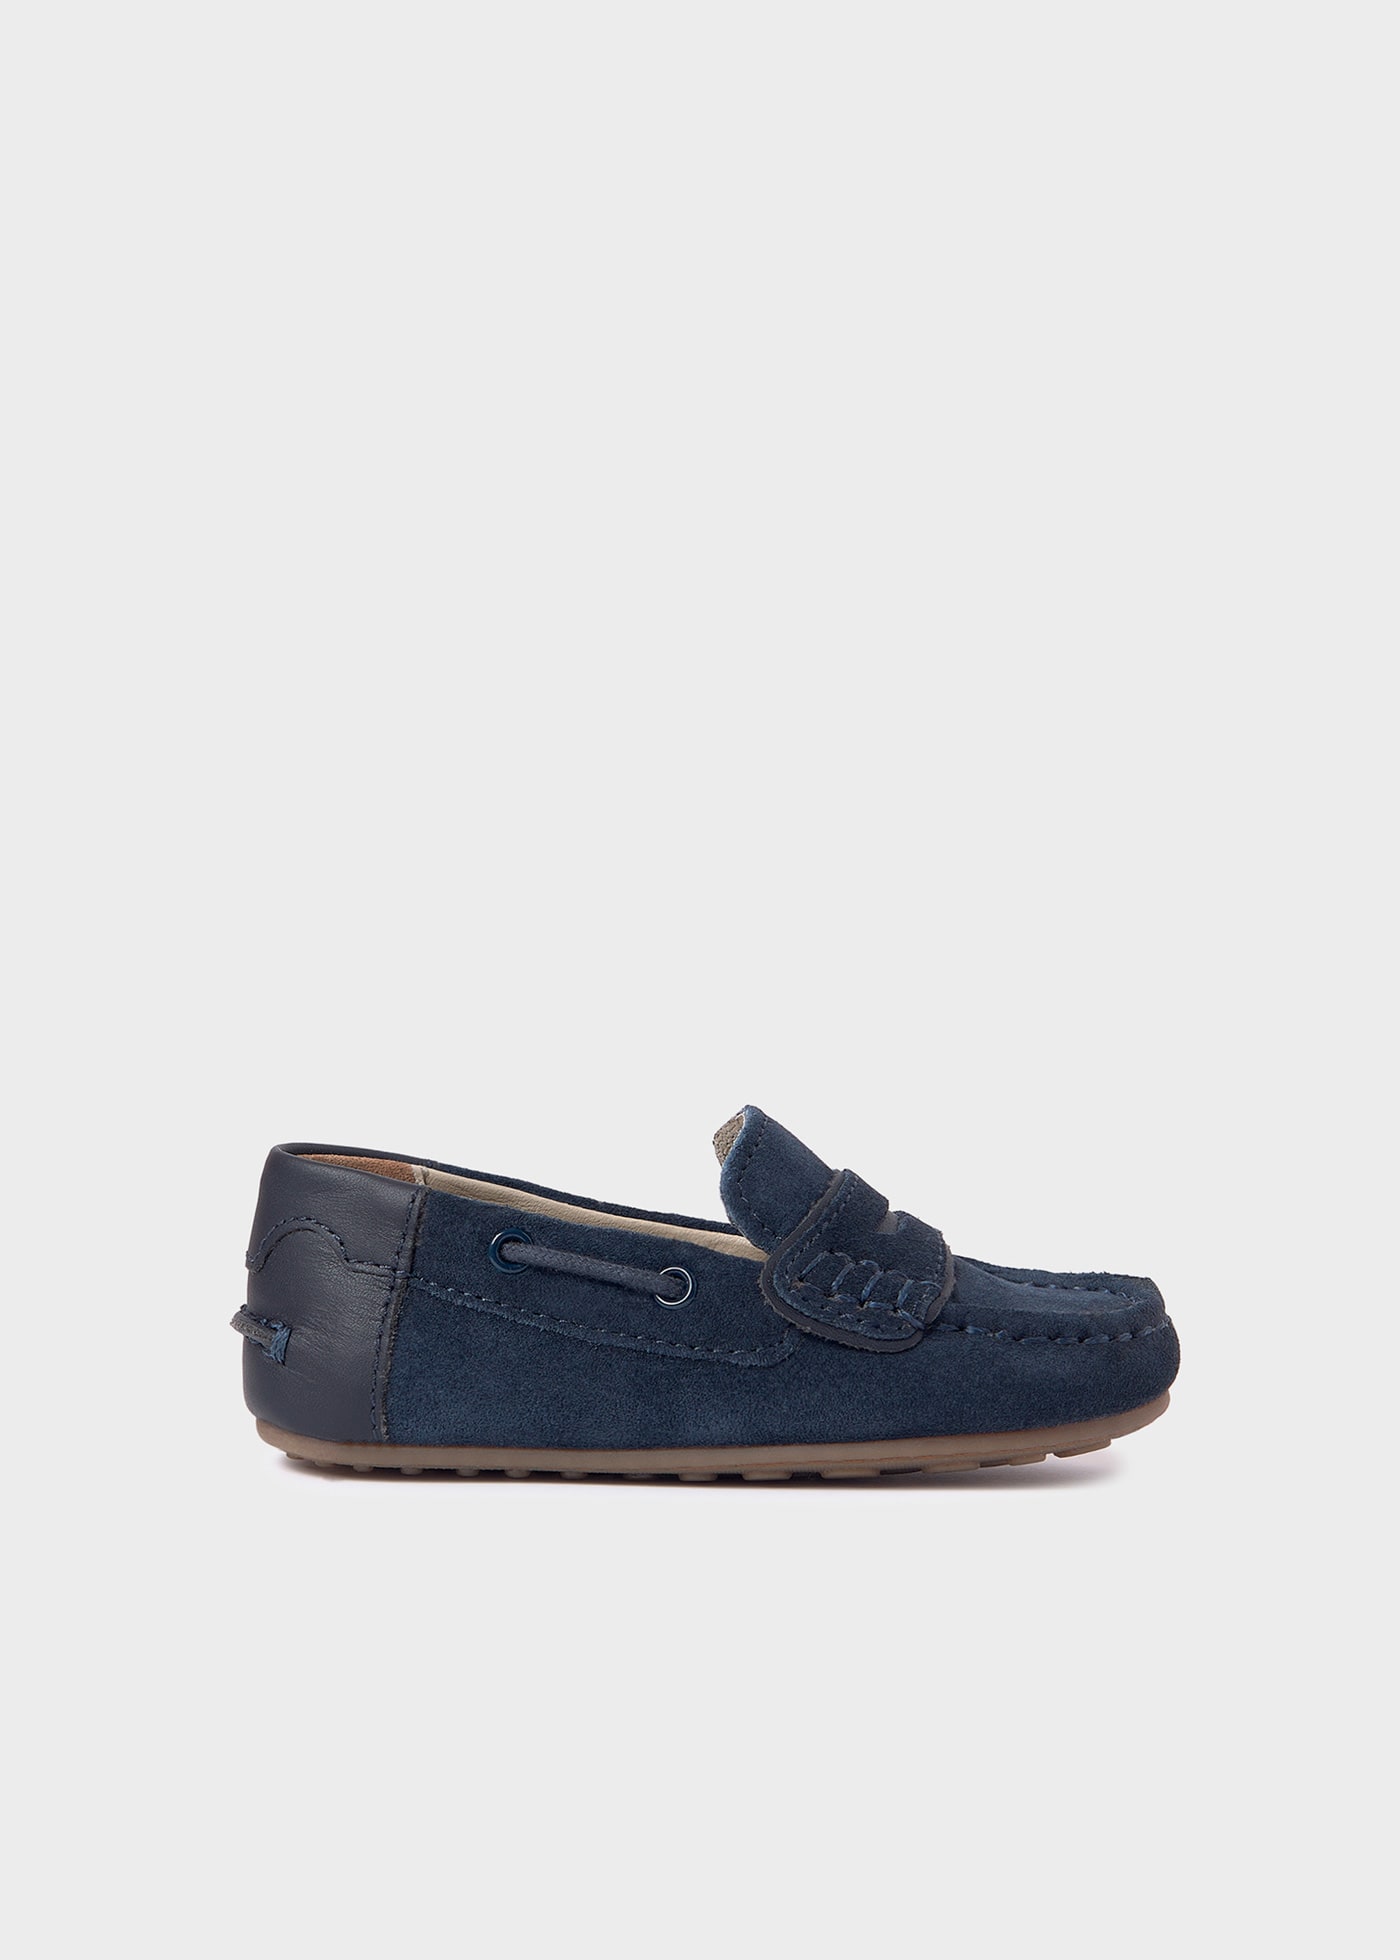 Boys leather moccasins